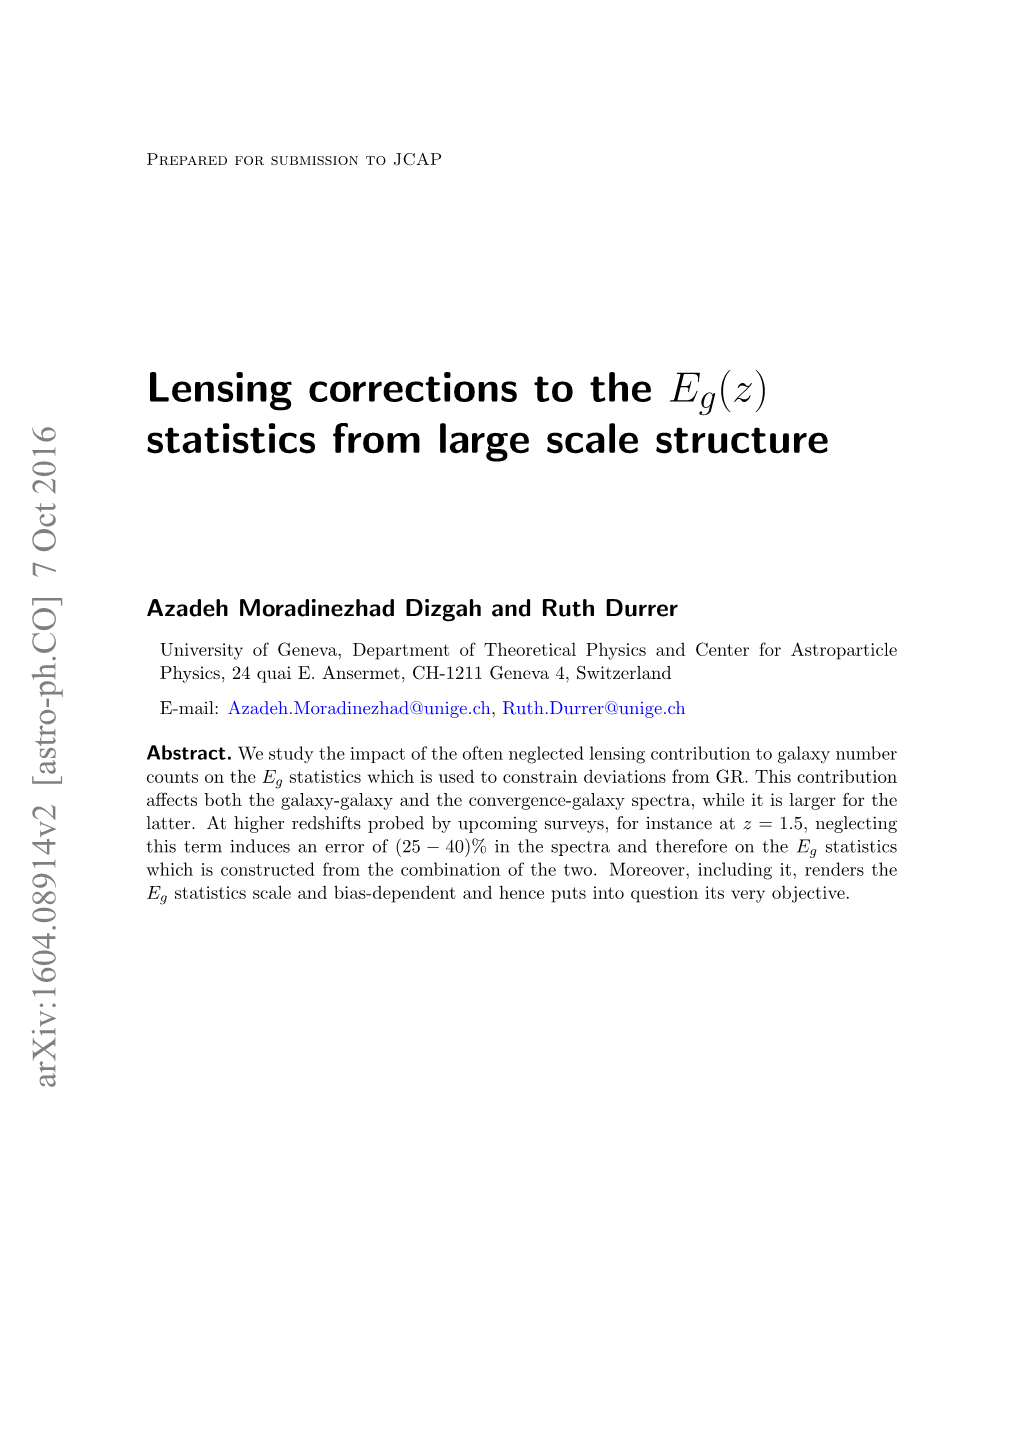 Lensing Corrections to the Eg(Z) Statistics from Large Scale Structure